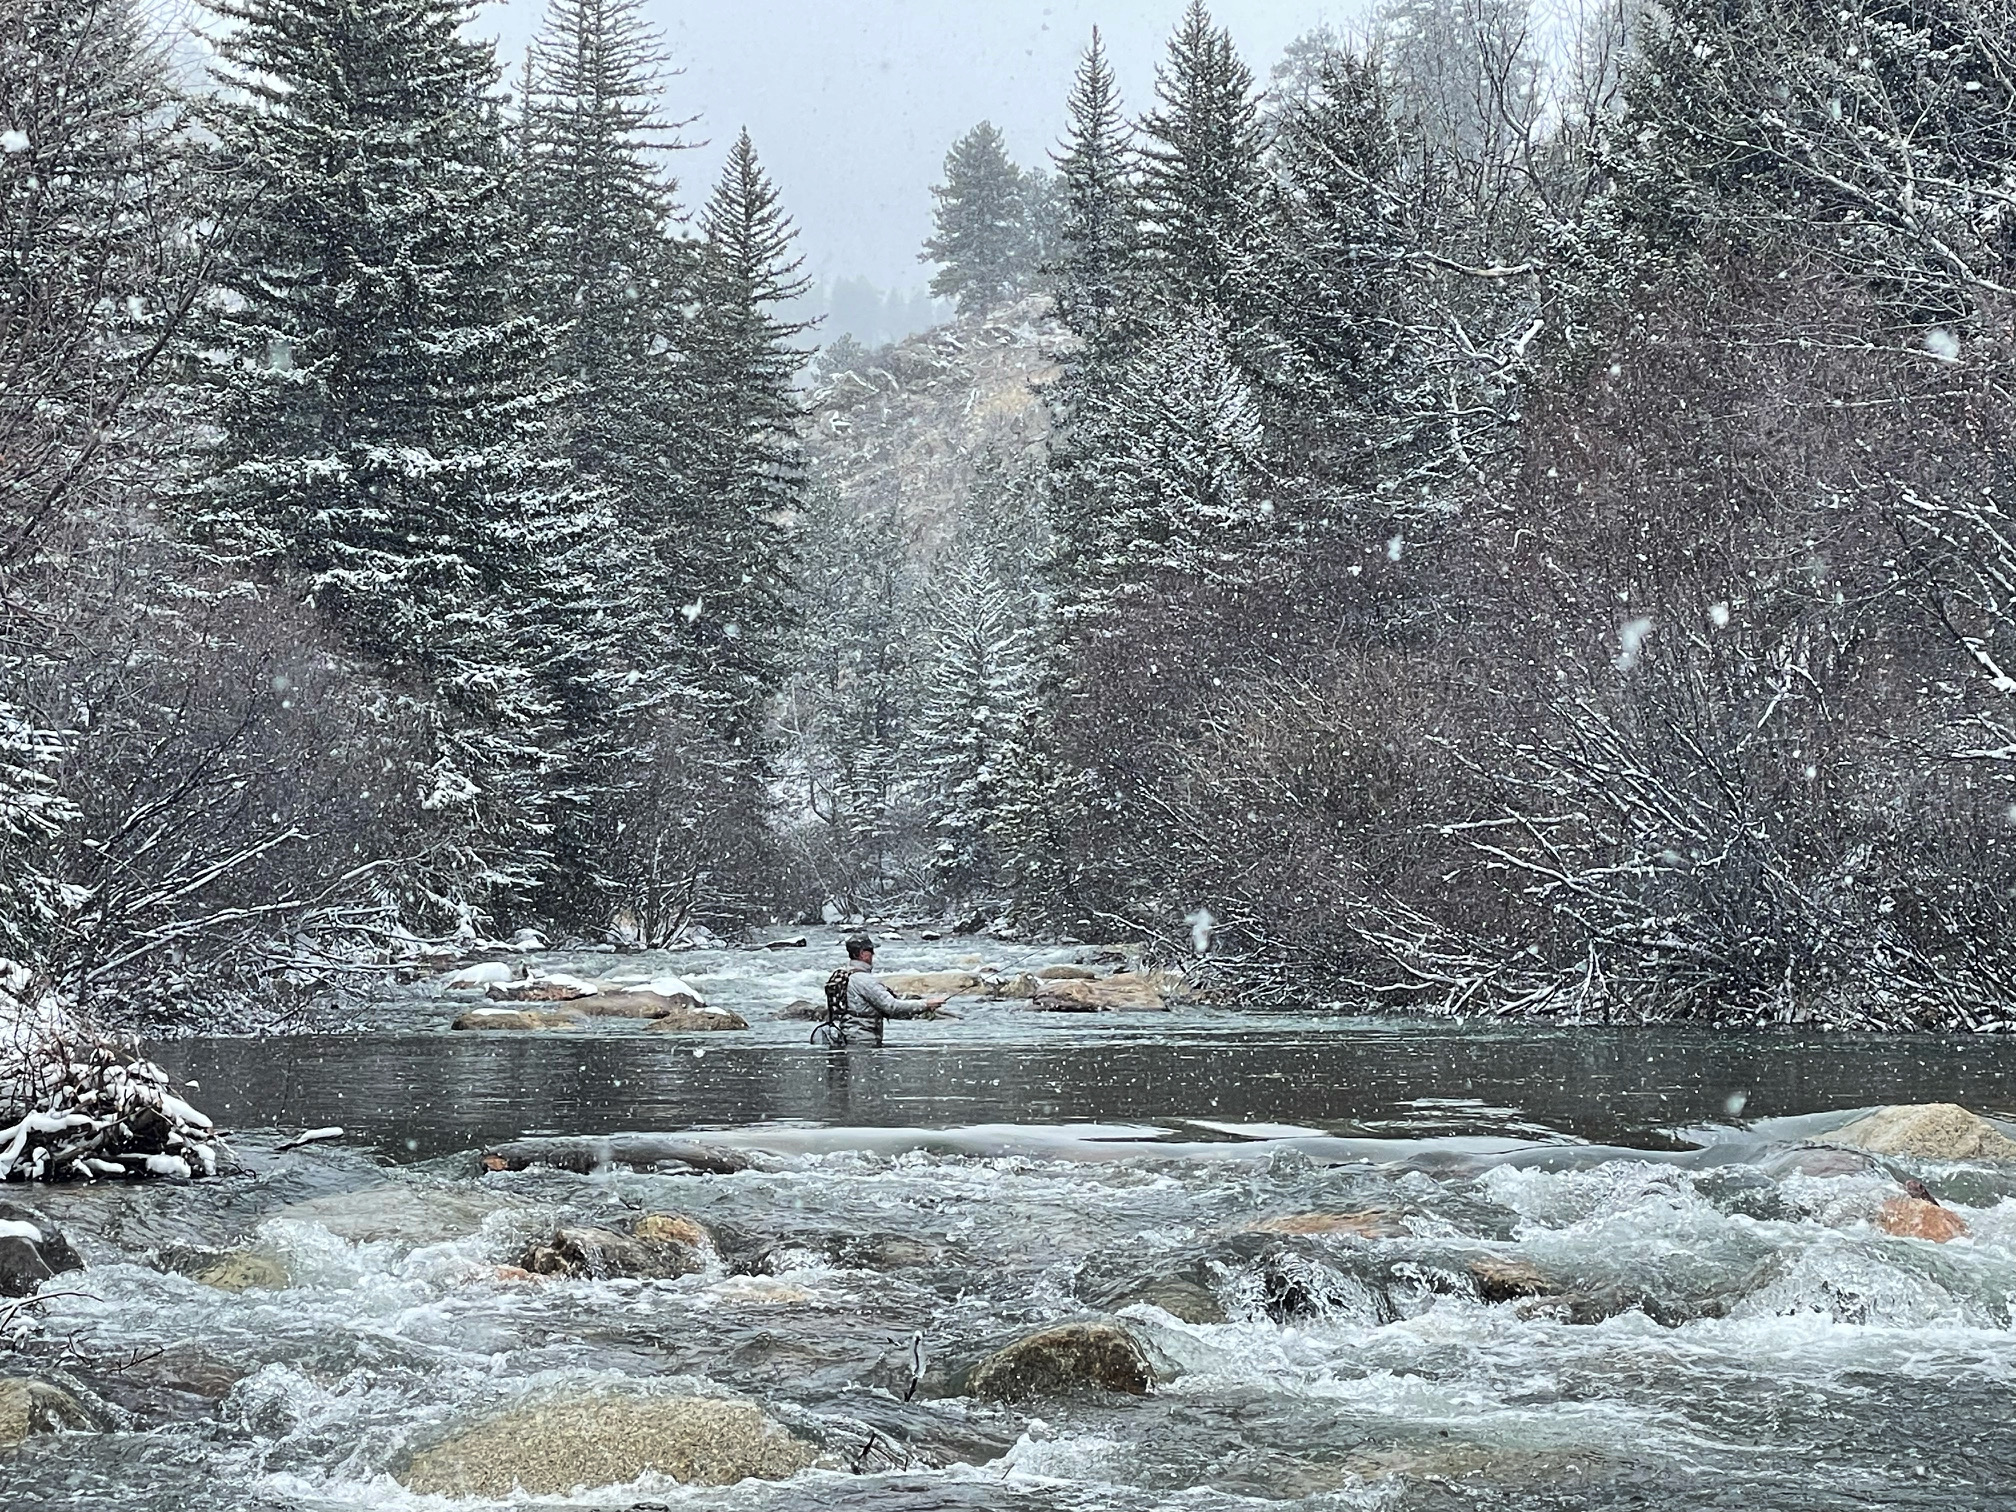 Fly Fishing Silver Tip Ranch in the snow